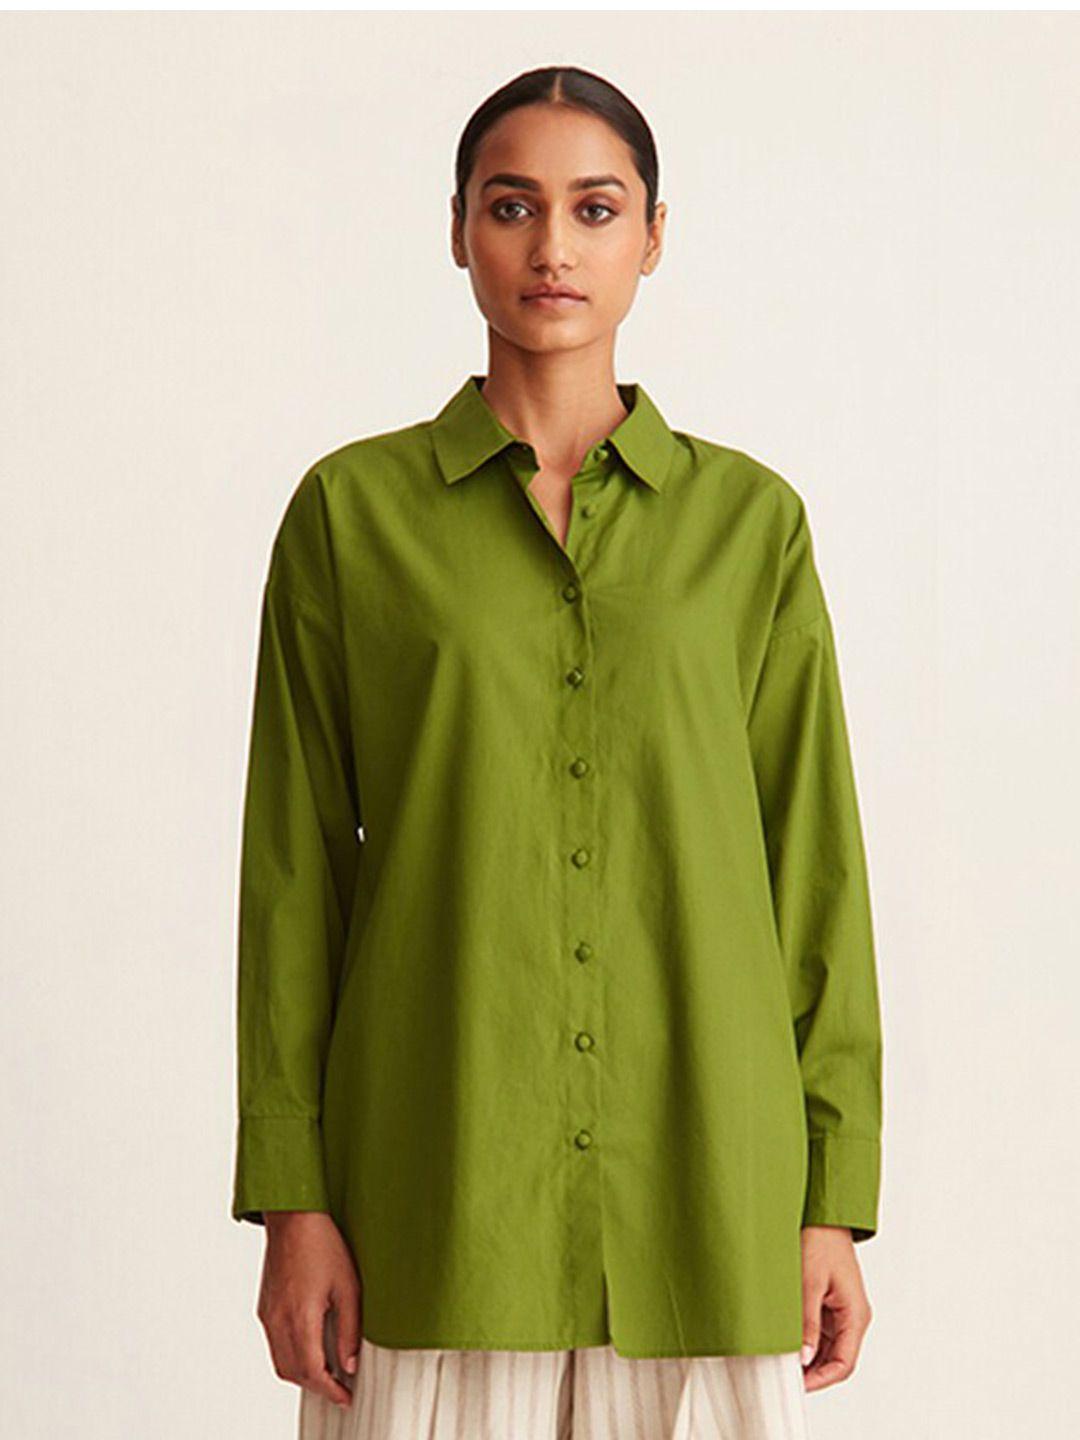 ancestry-green-shirt-style-top